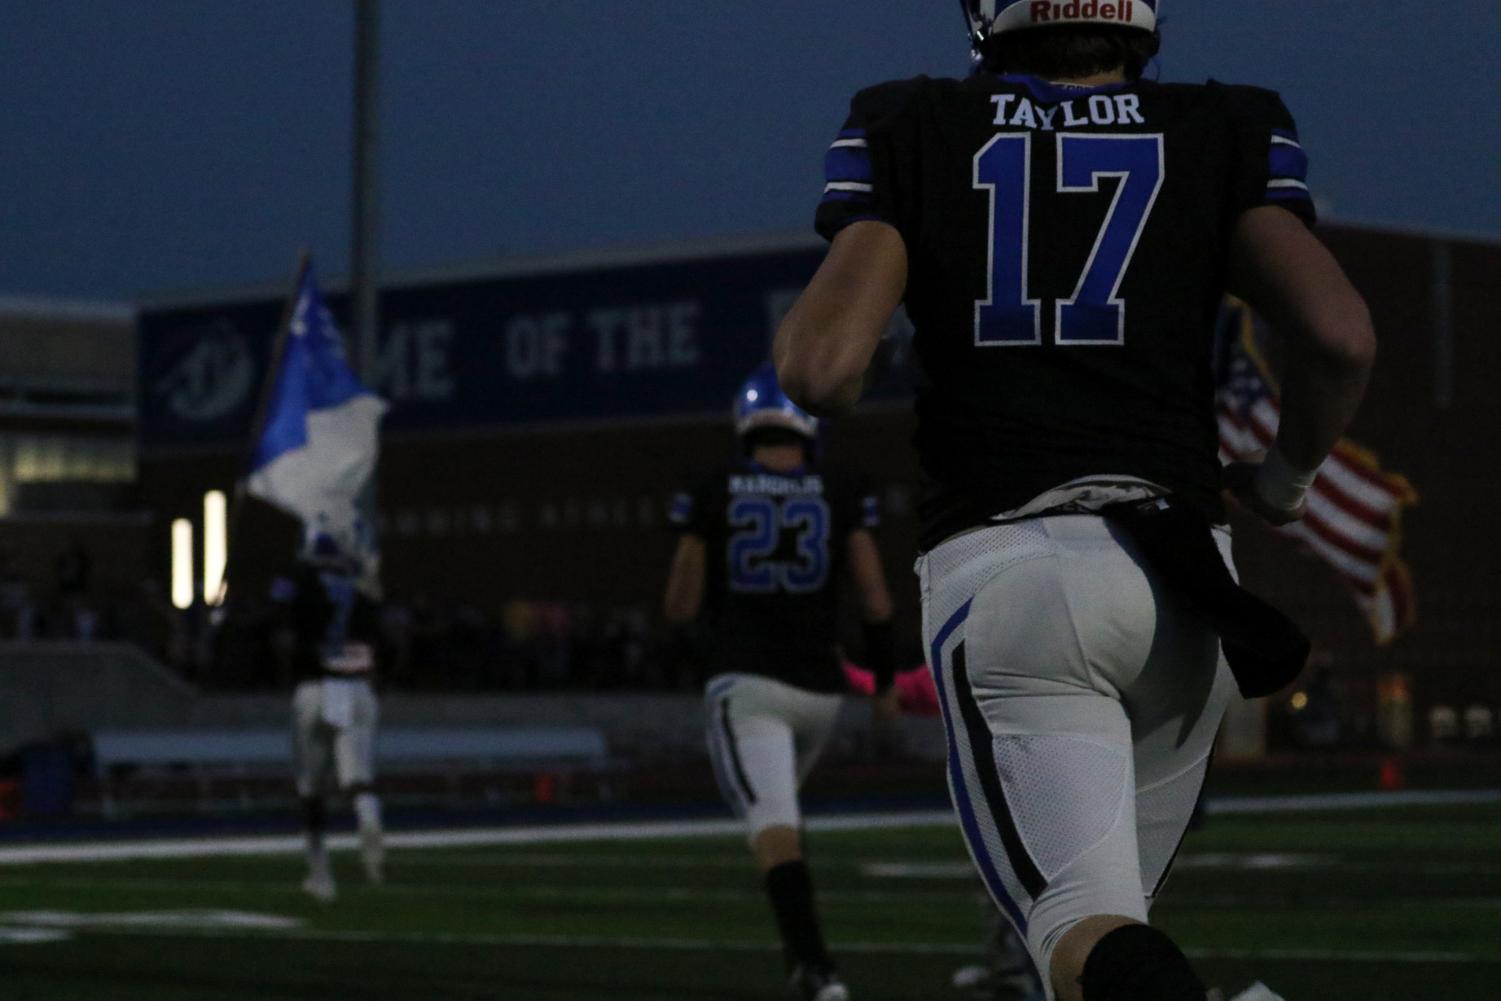 Ladue+varsity+football+wins+against+Lafayette+in+Oct.+8+game